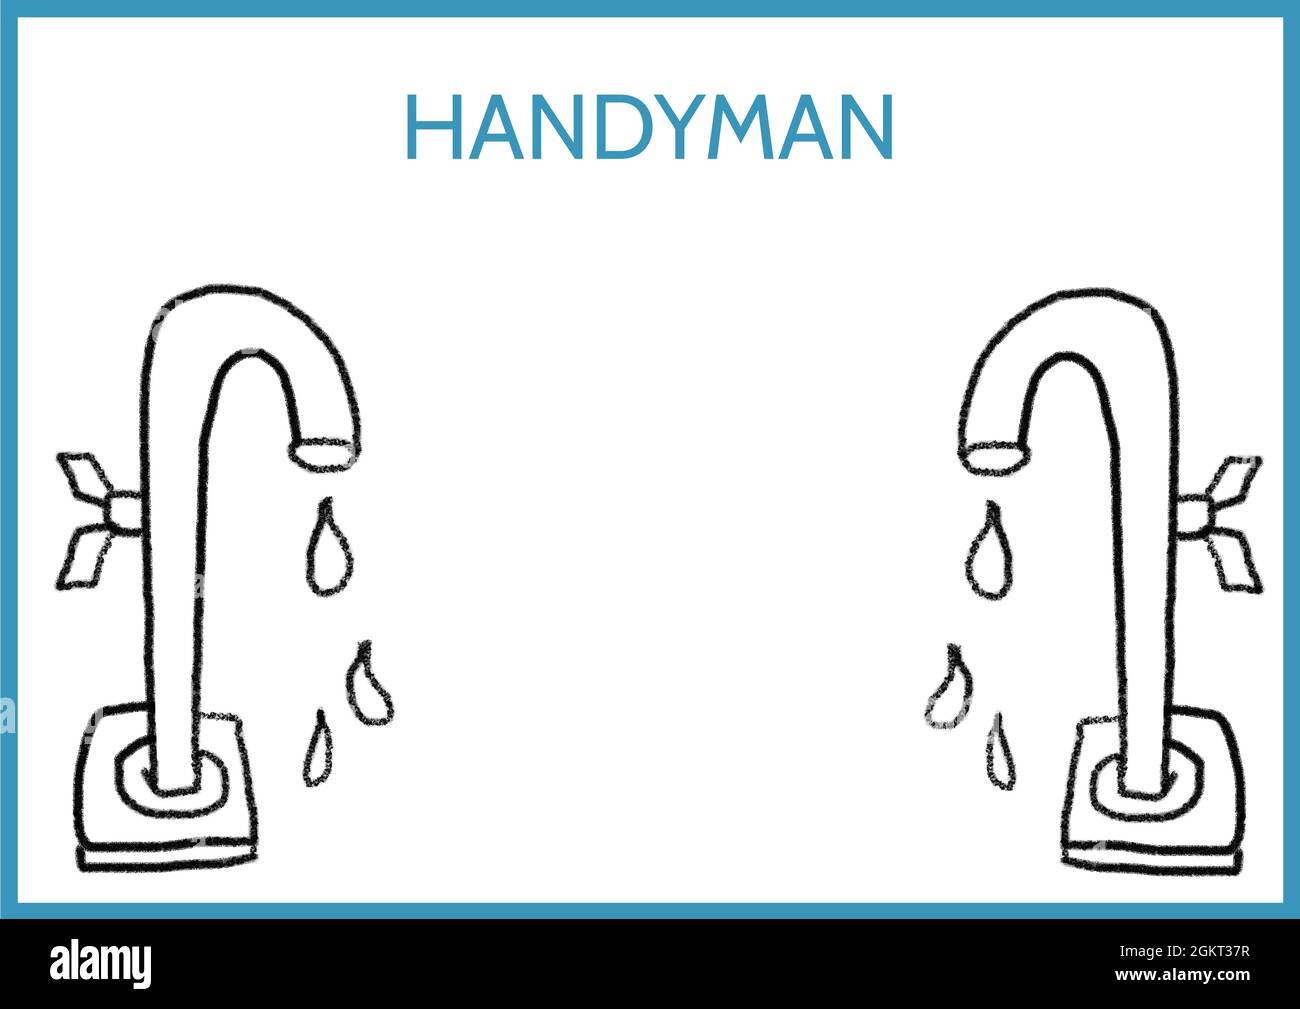 Digitally generated image of handyman text over two faucet icons against white background Stock Photo